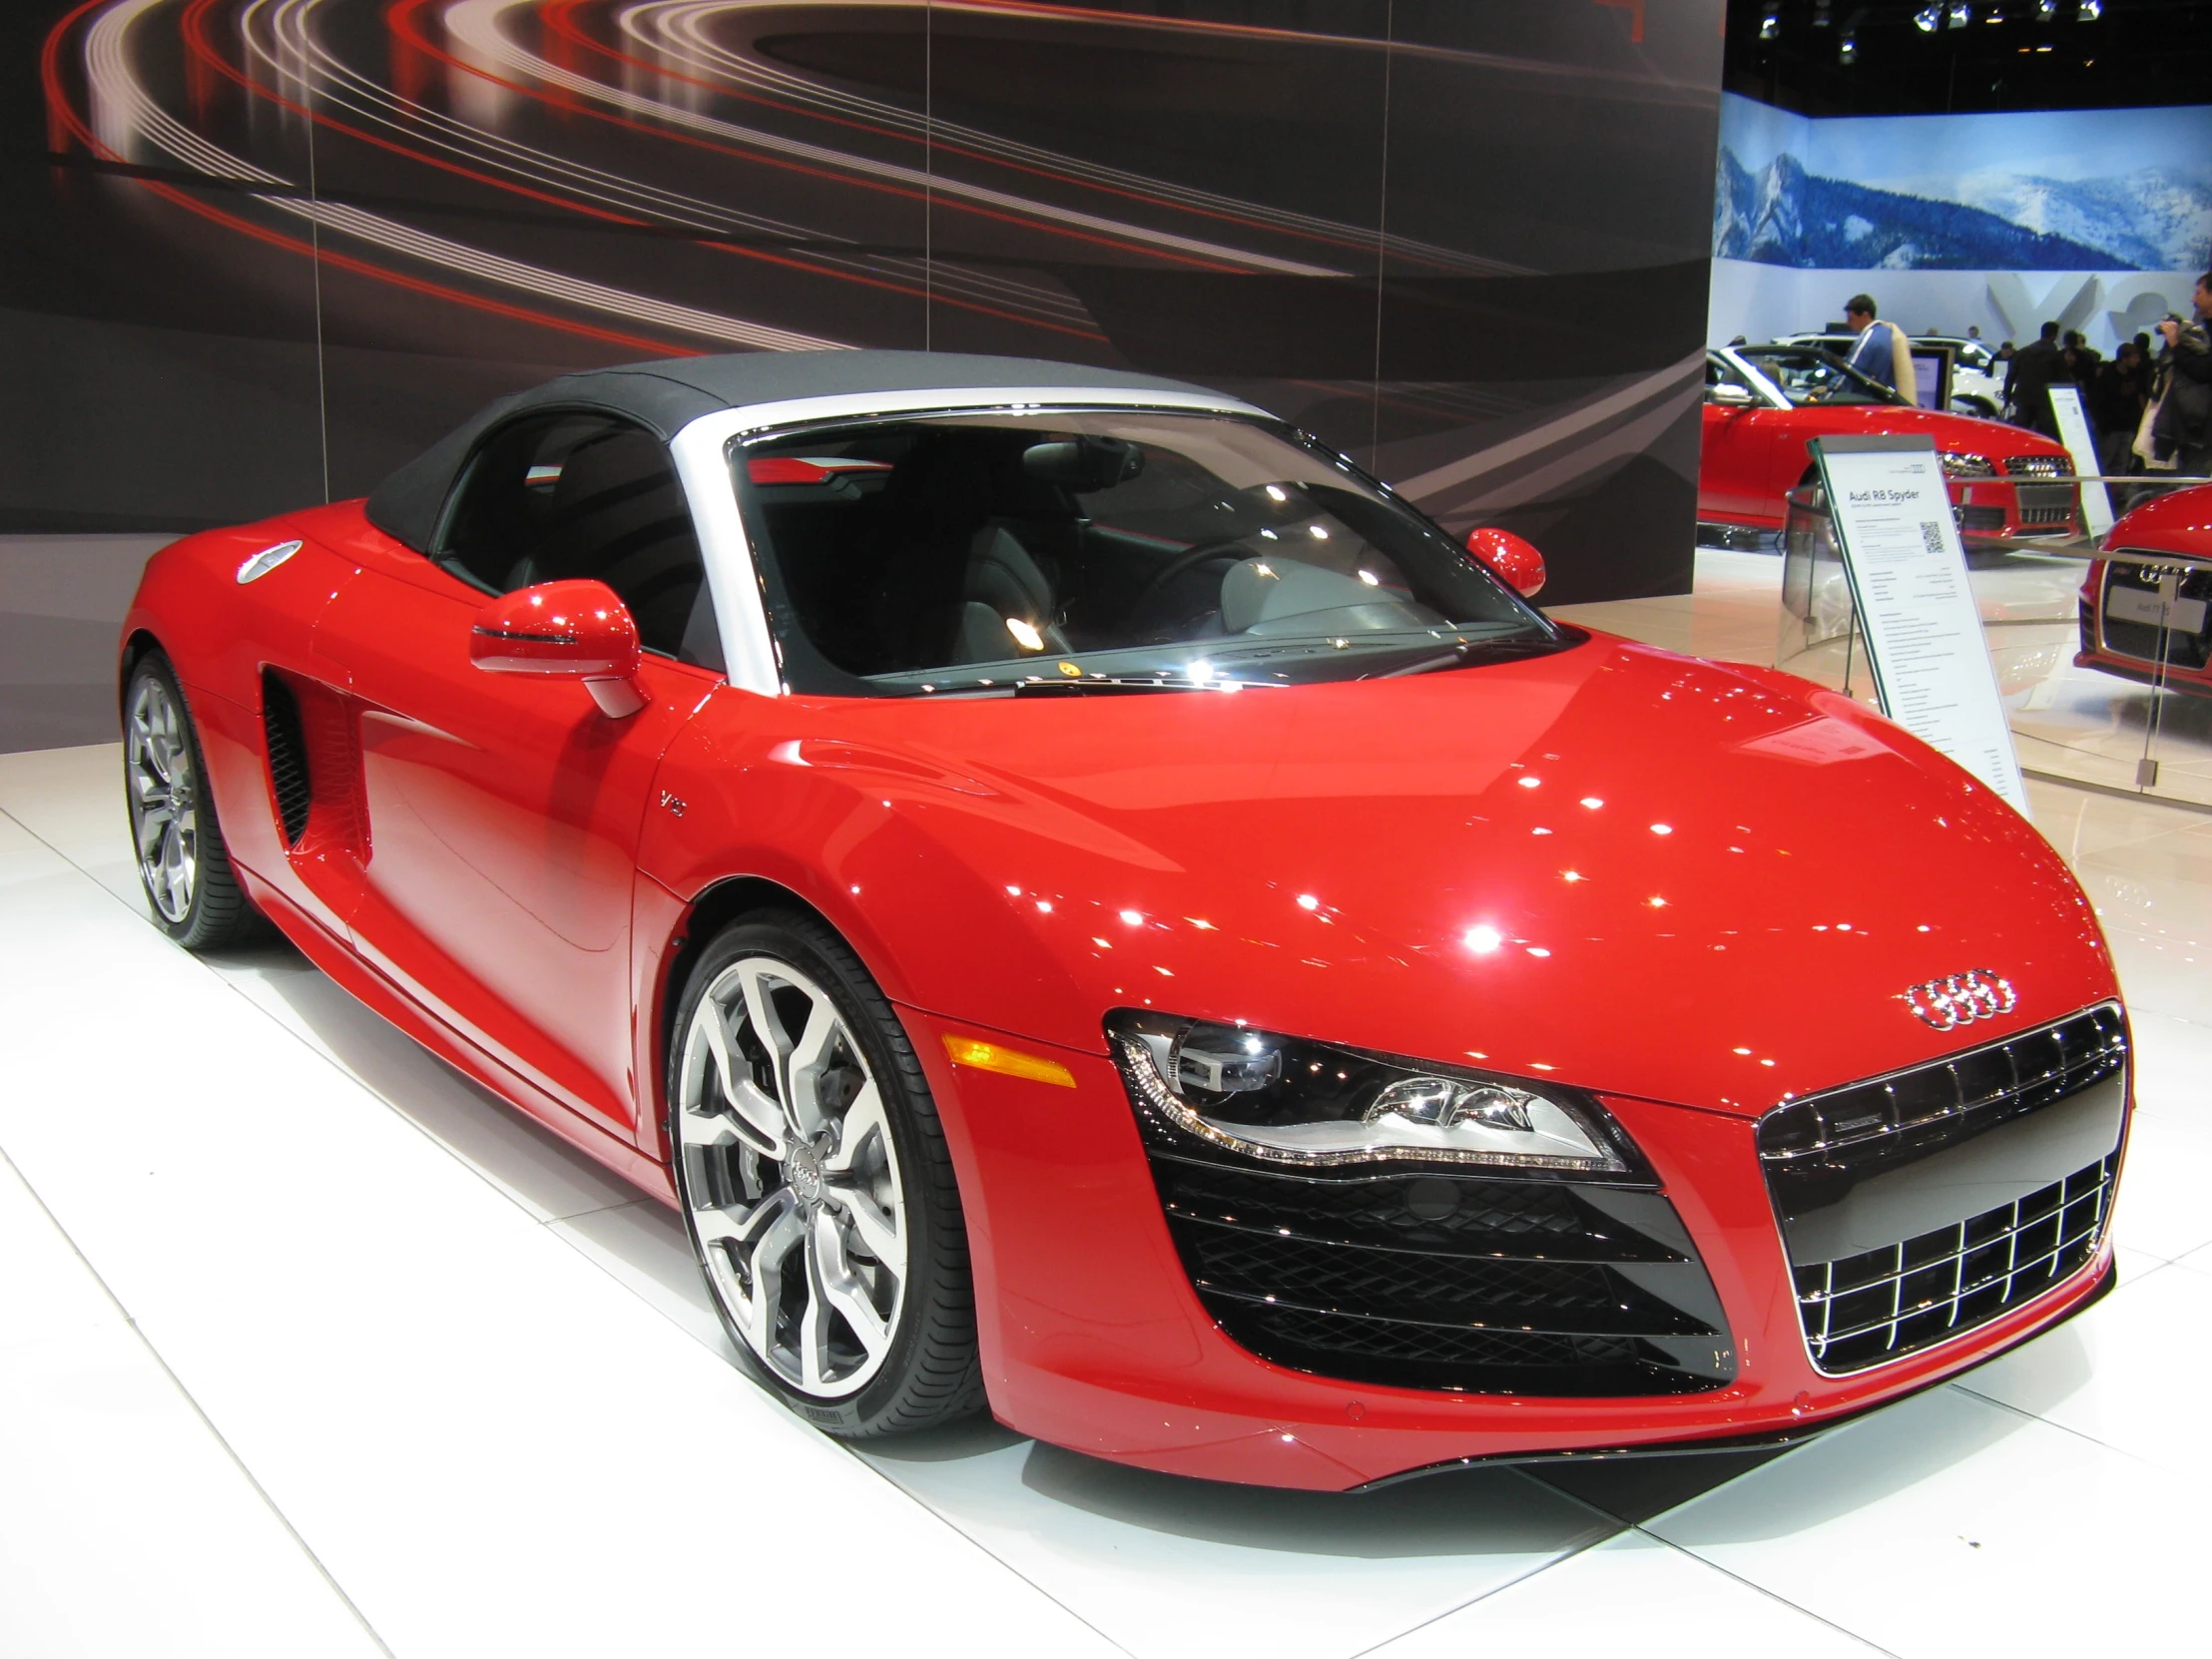 the audi r8 concept car is on display at the geneva motor show